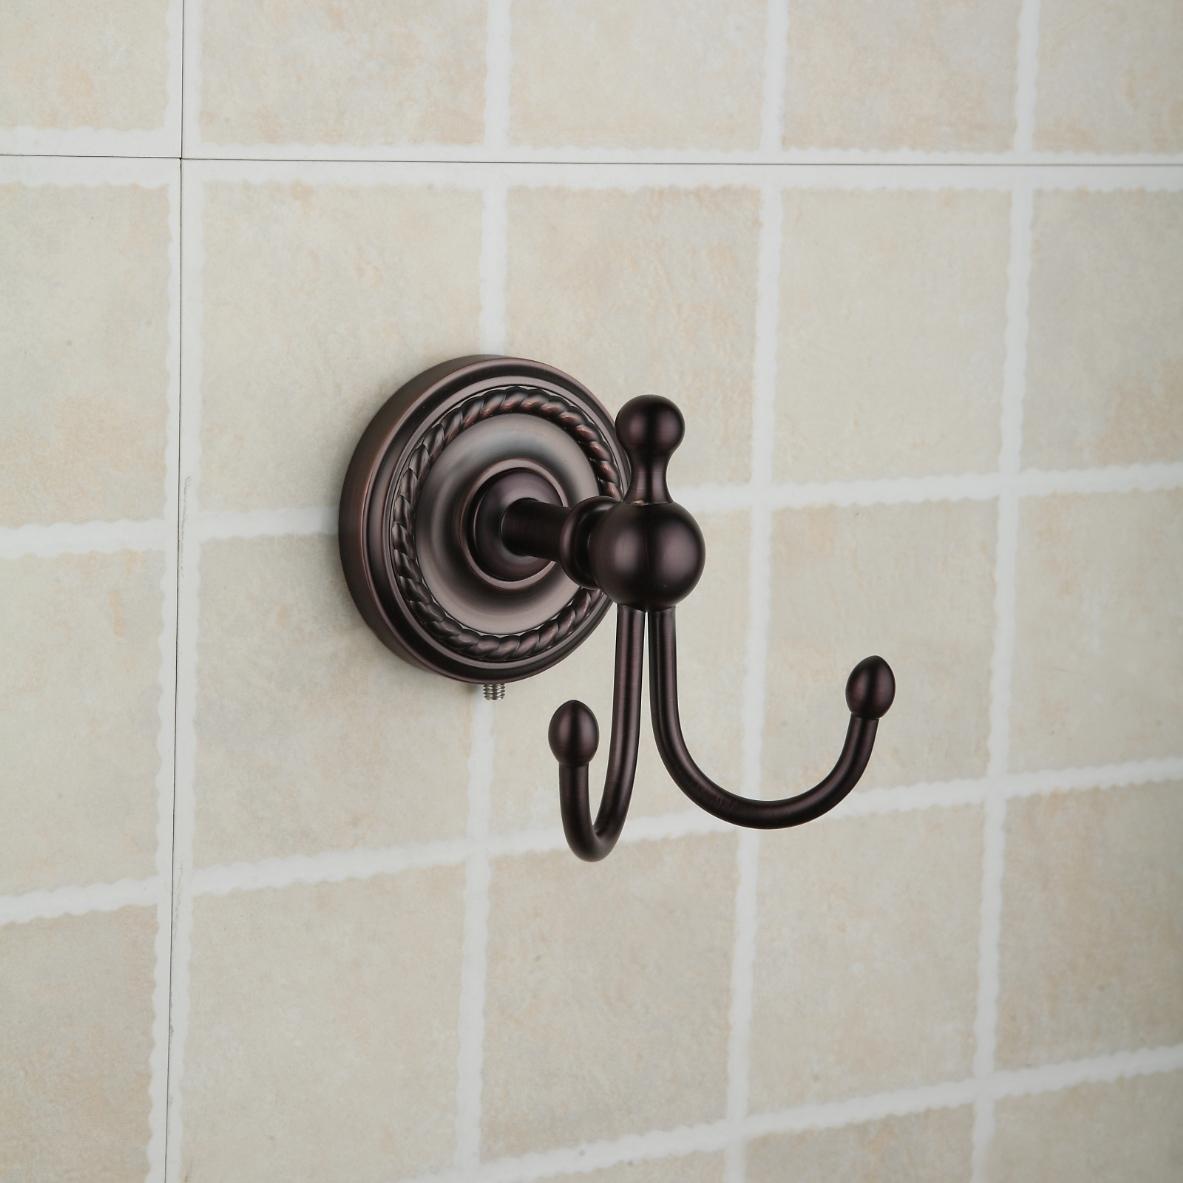 Solid Brass Wall Mount Row Robe Hook Antique Brass Finish TAB6114 [TAB6114]  - £28.99 